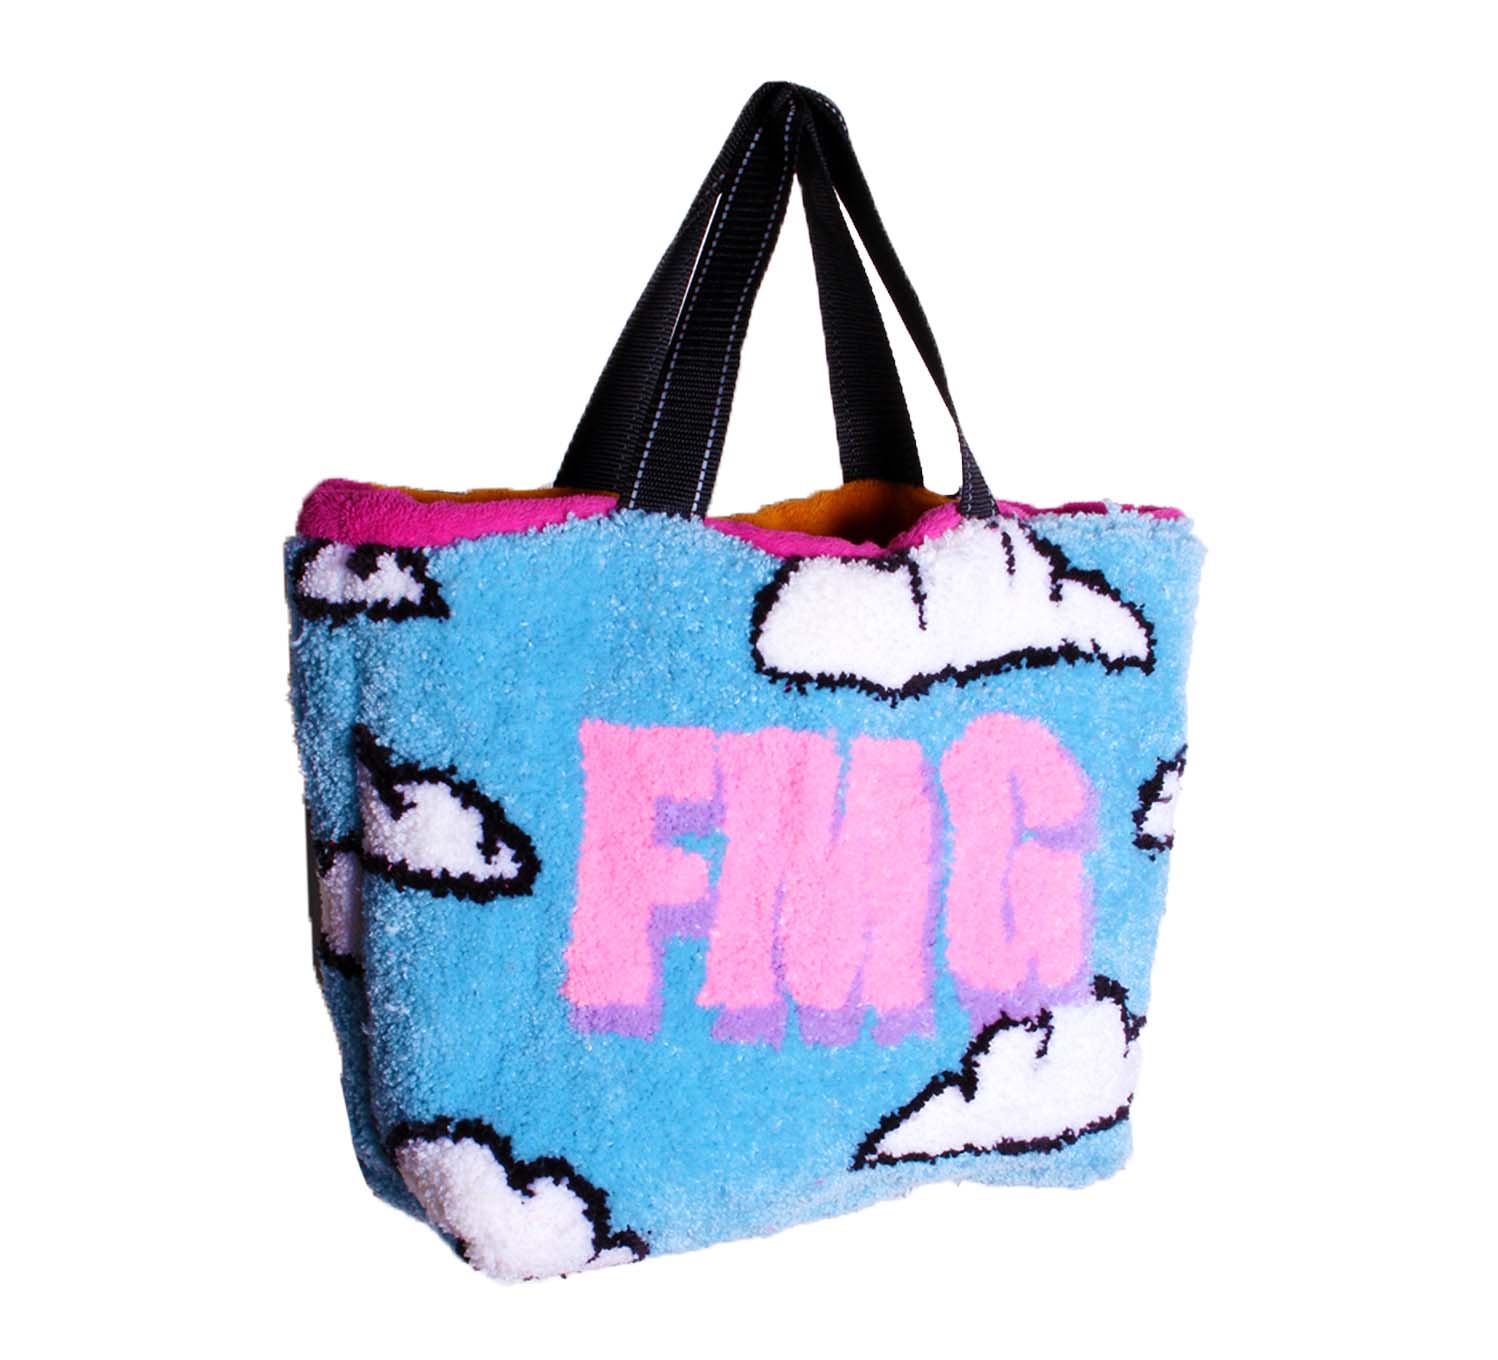 FMG SKYS THE LIMIT TOTE BAG